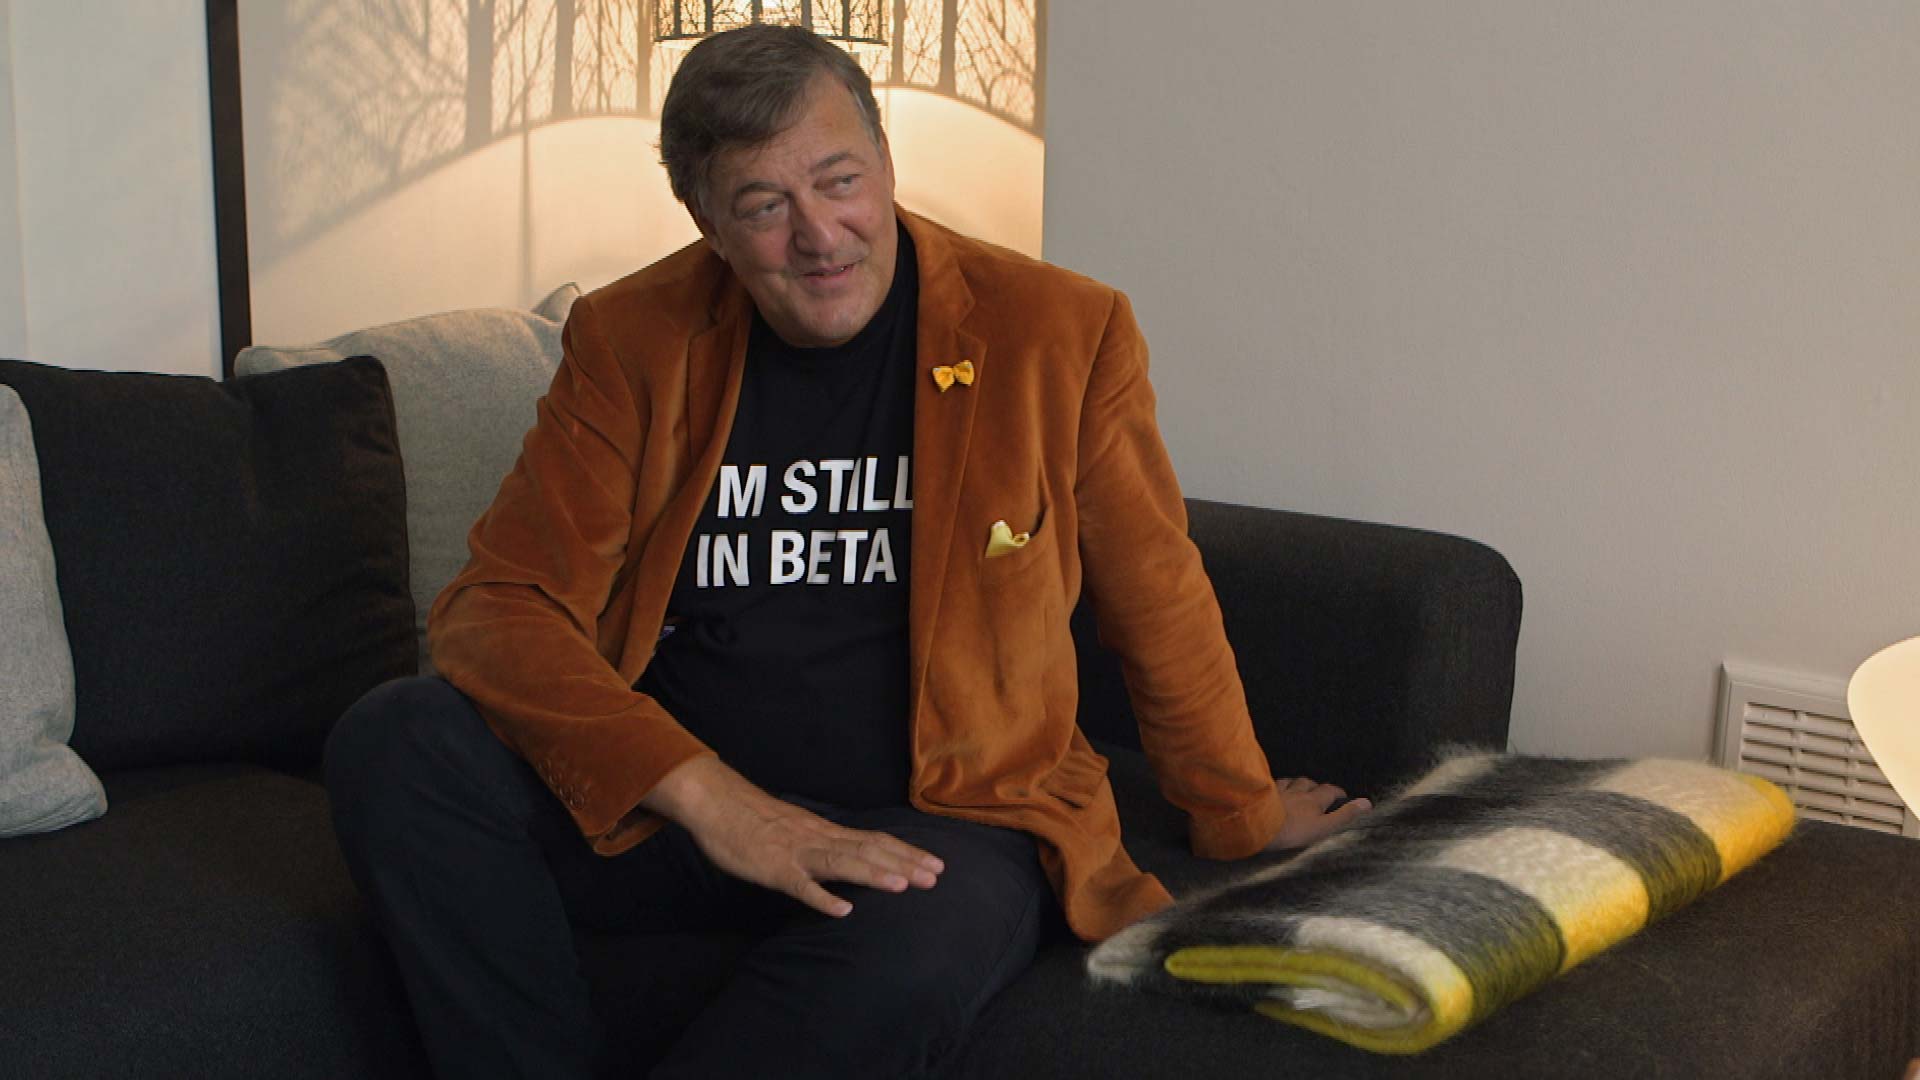 Actor and comedian Stephen Fry